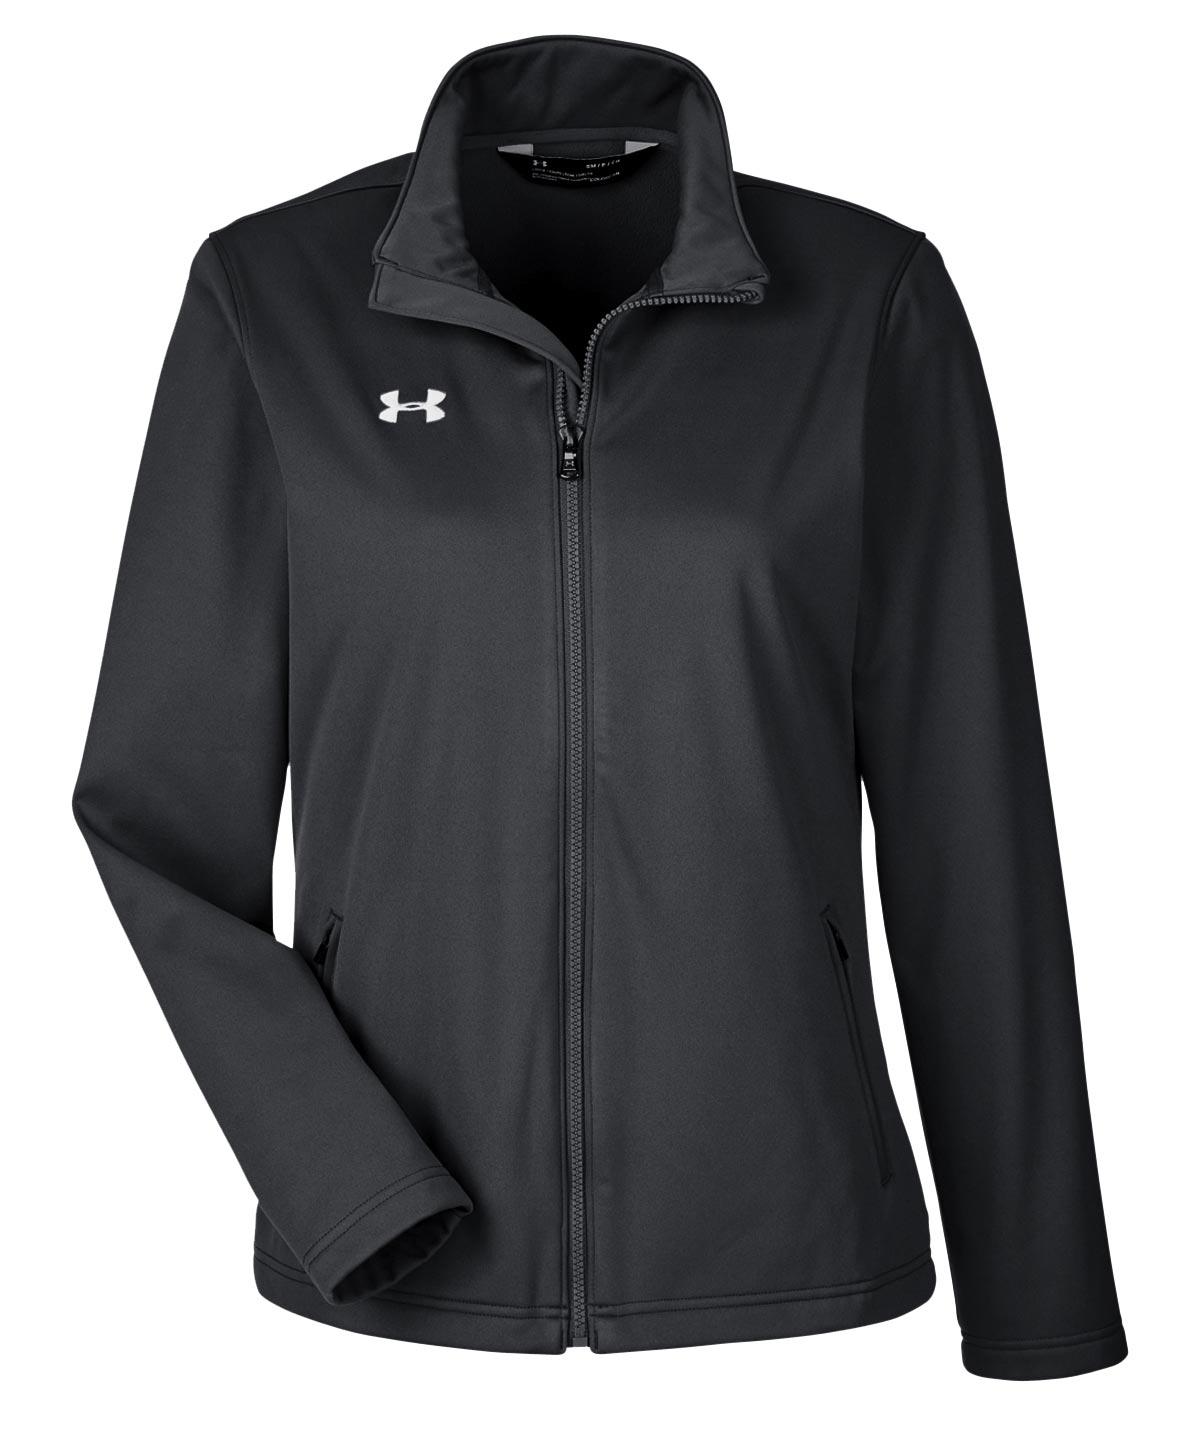 Under Armour Jackets Logo - Custom Under Armour Jackets and Outerwear